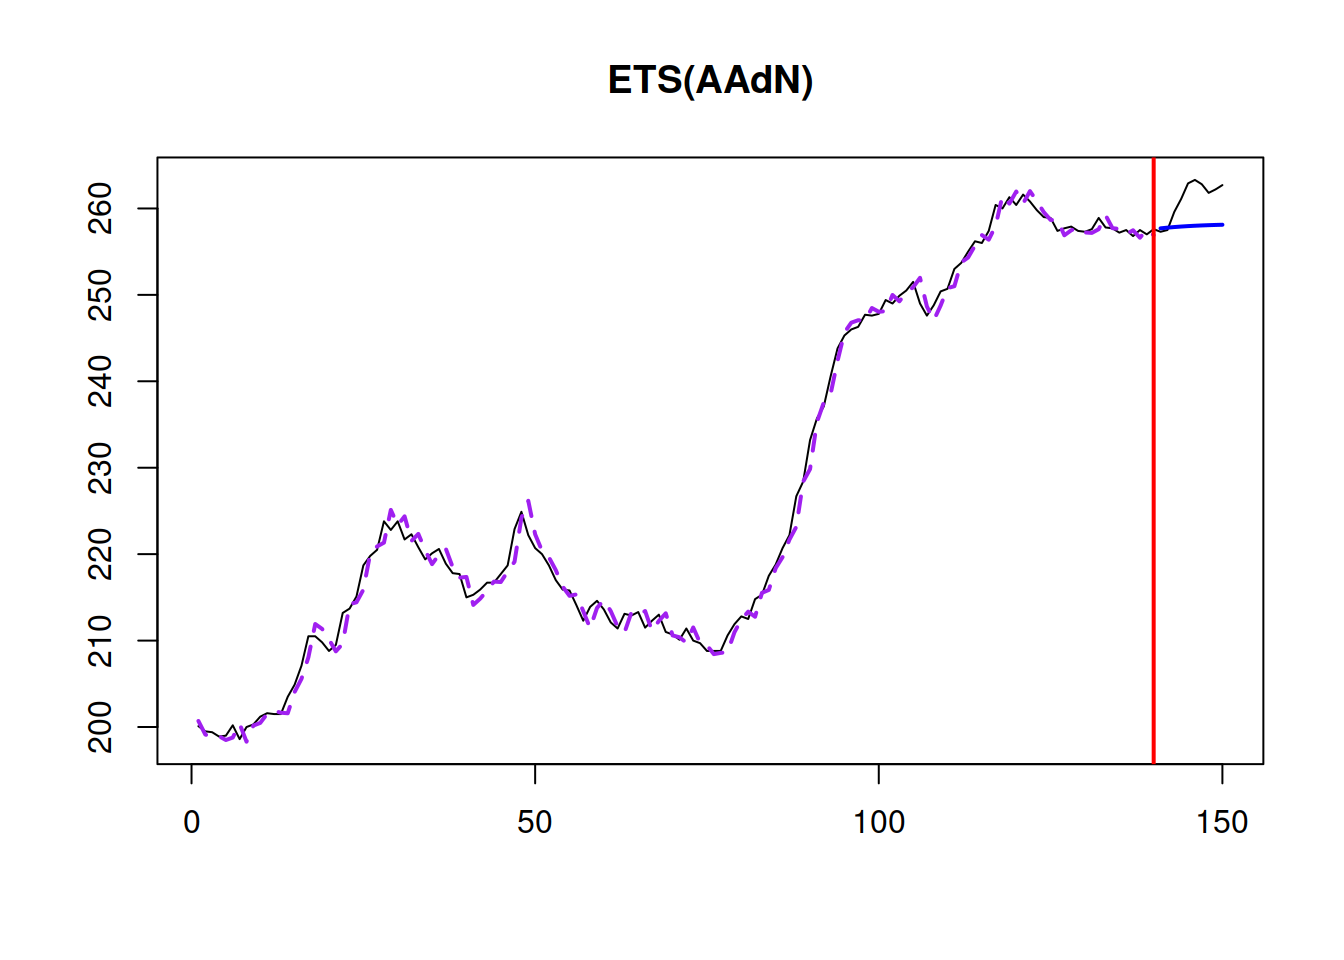 Model fit and point forecasts of ETS(A,Ad,N) on Box-Jenkins sales data.